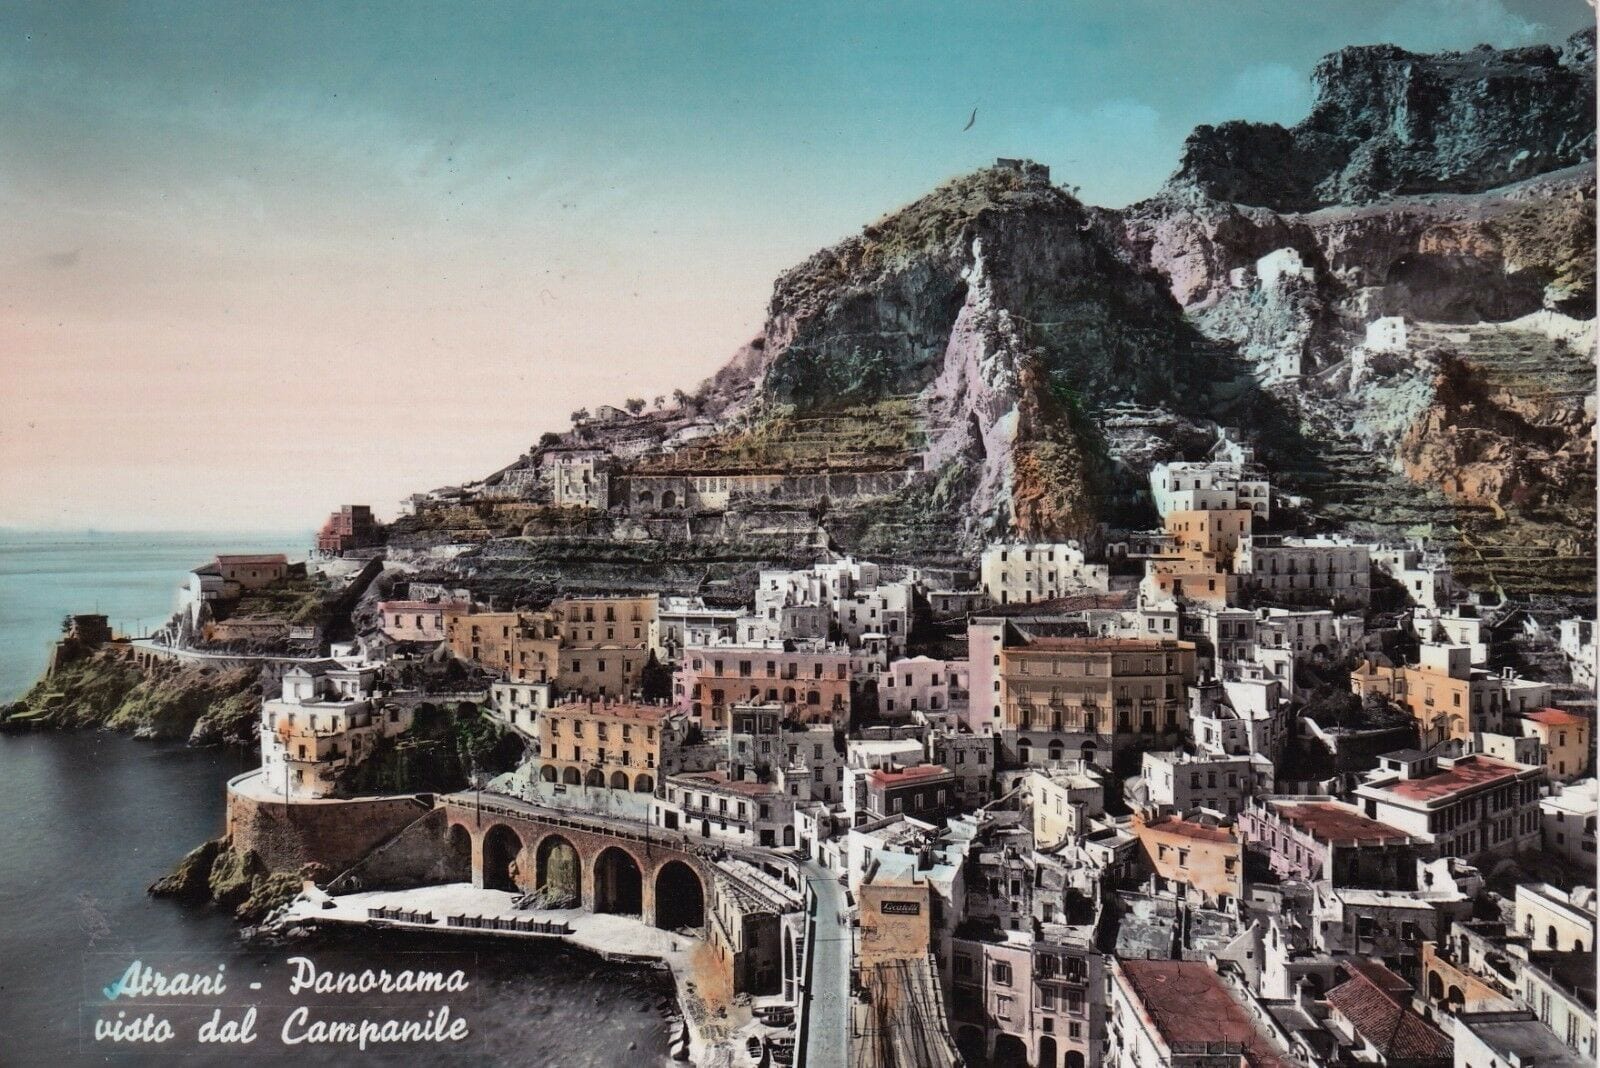 View of Atrani from the city bell tower 1959.